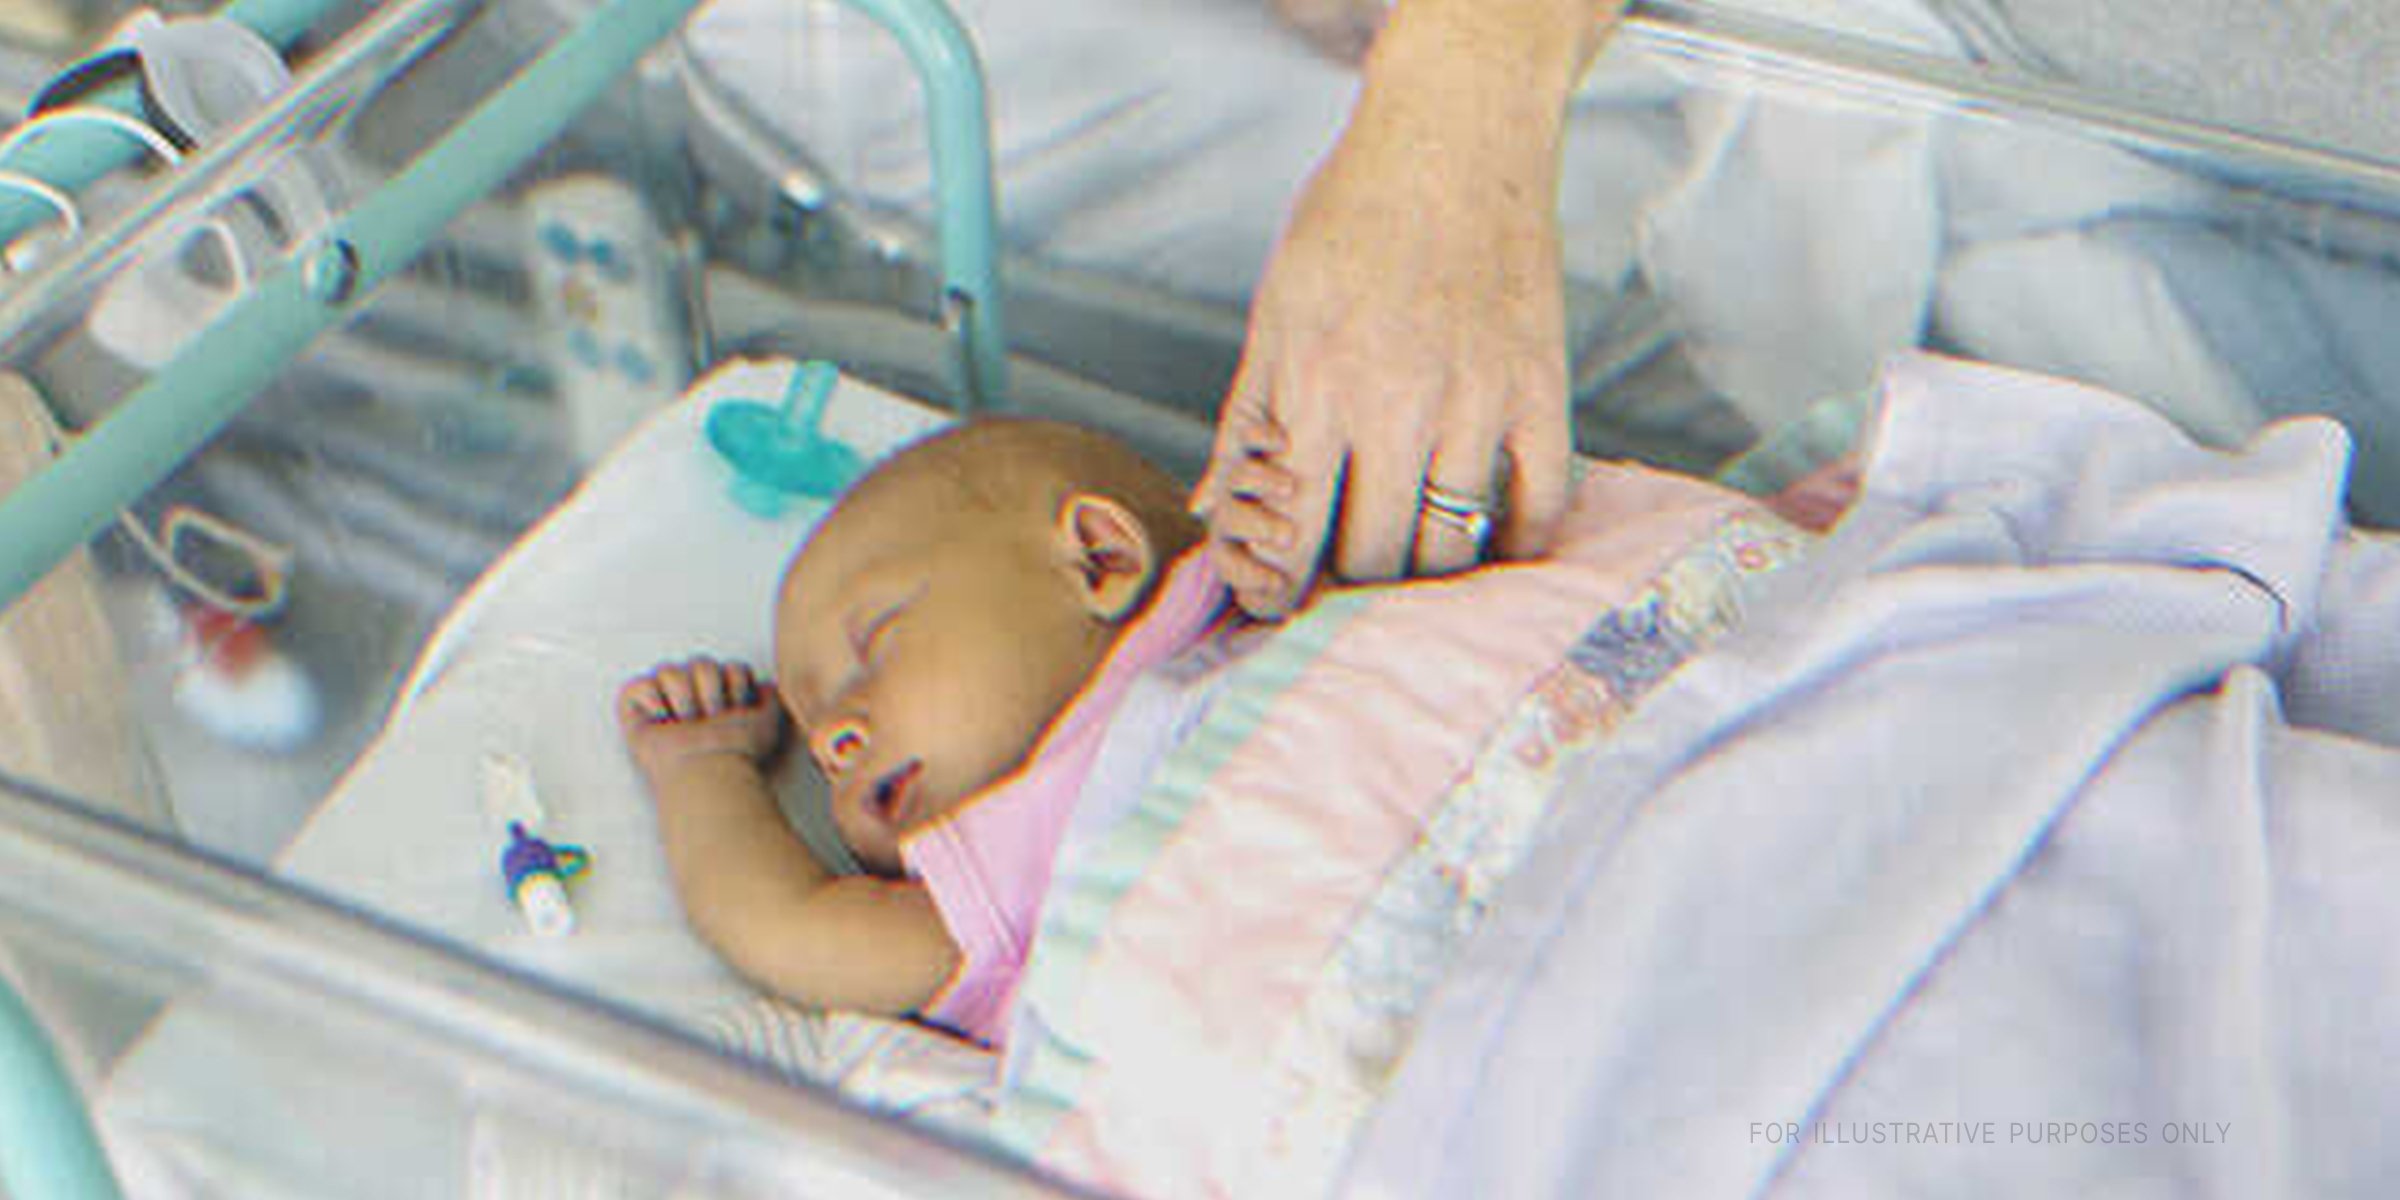 Newborn baby in the hospital. | Source: Getty Images